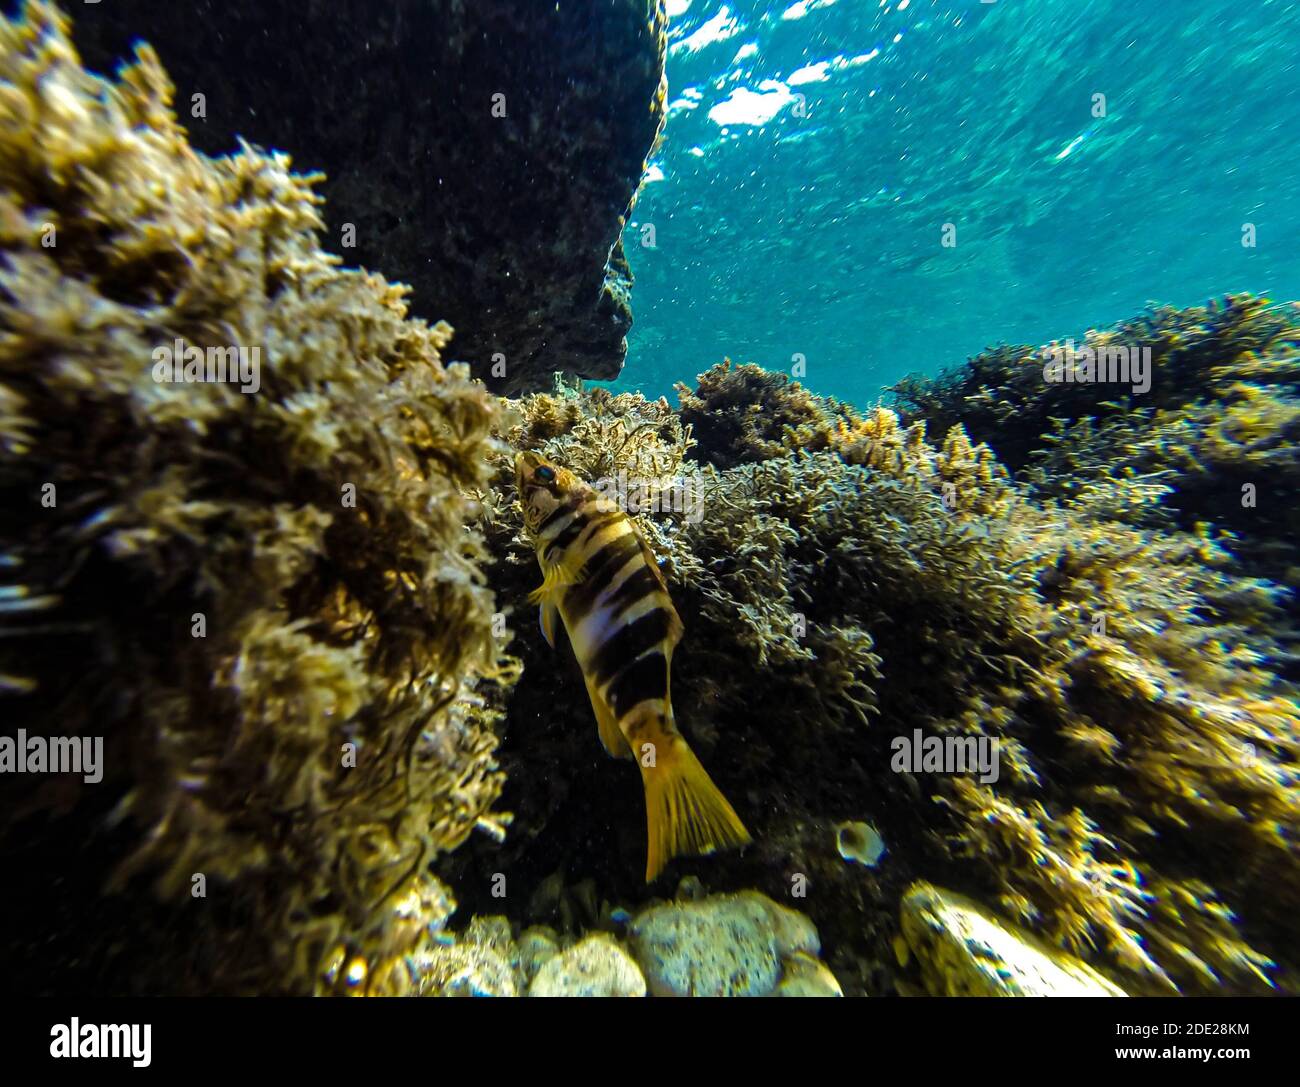 Wrasse hiding among the seaweed on the bottom of the sea. Stock Photo